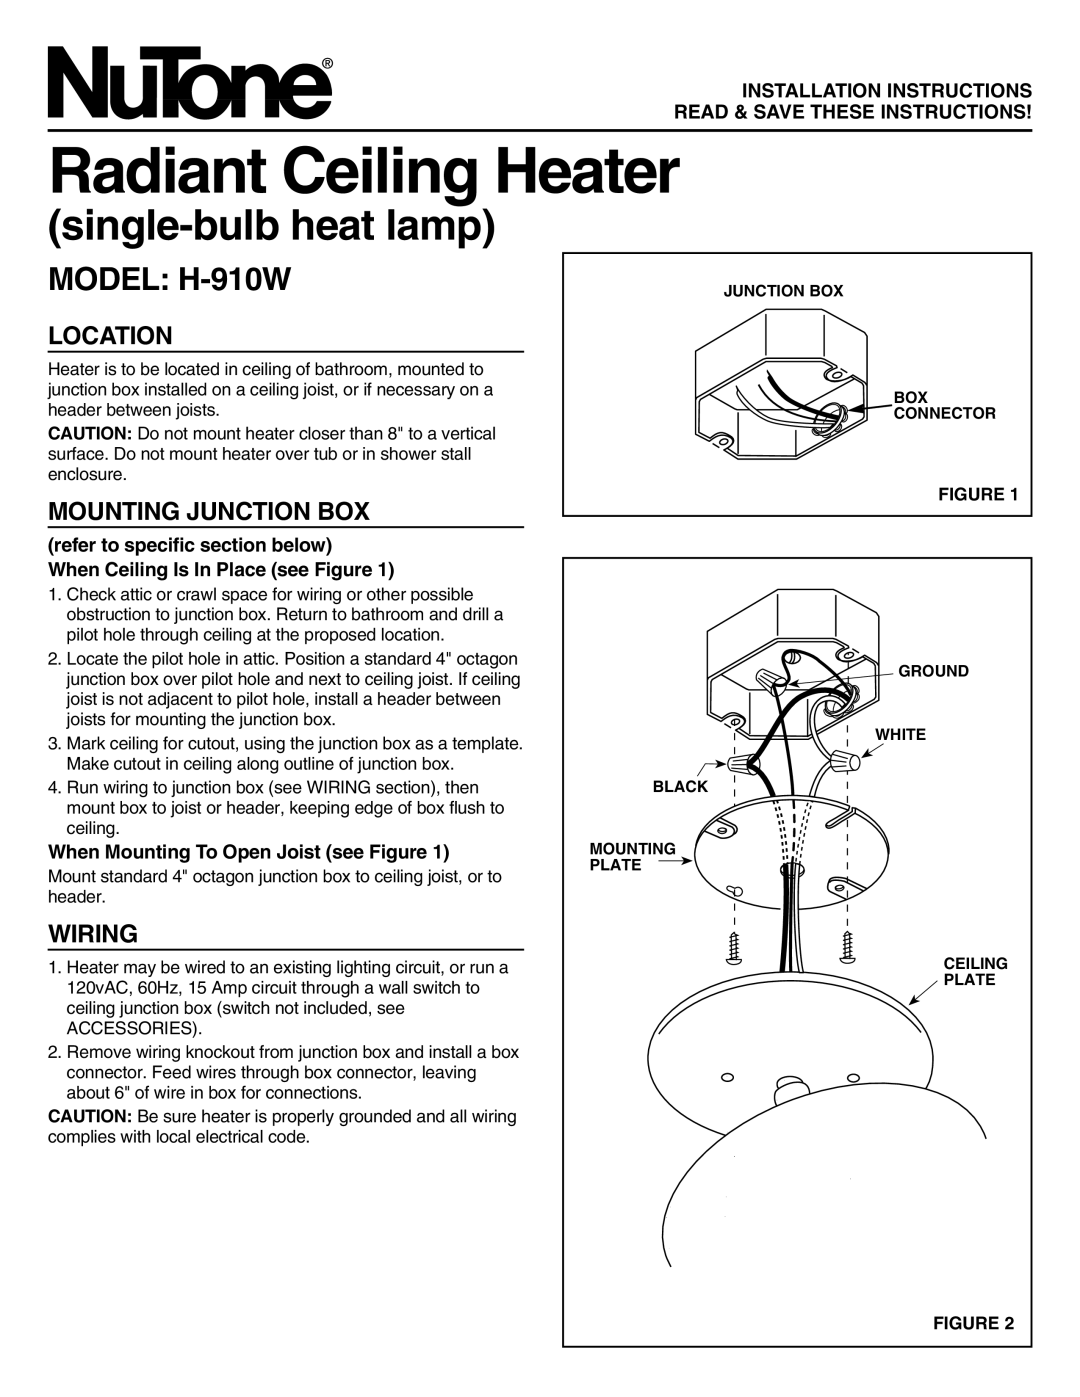 NuTone installation instructions Location, Mounting Junction Box, Wiring, Radiant Ceiling Heater, MODEL H-910W 